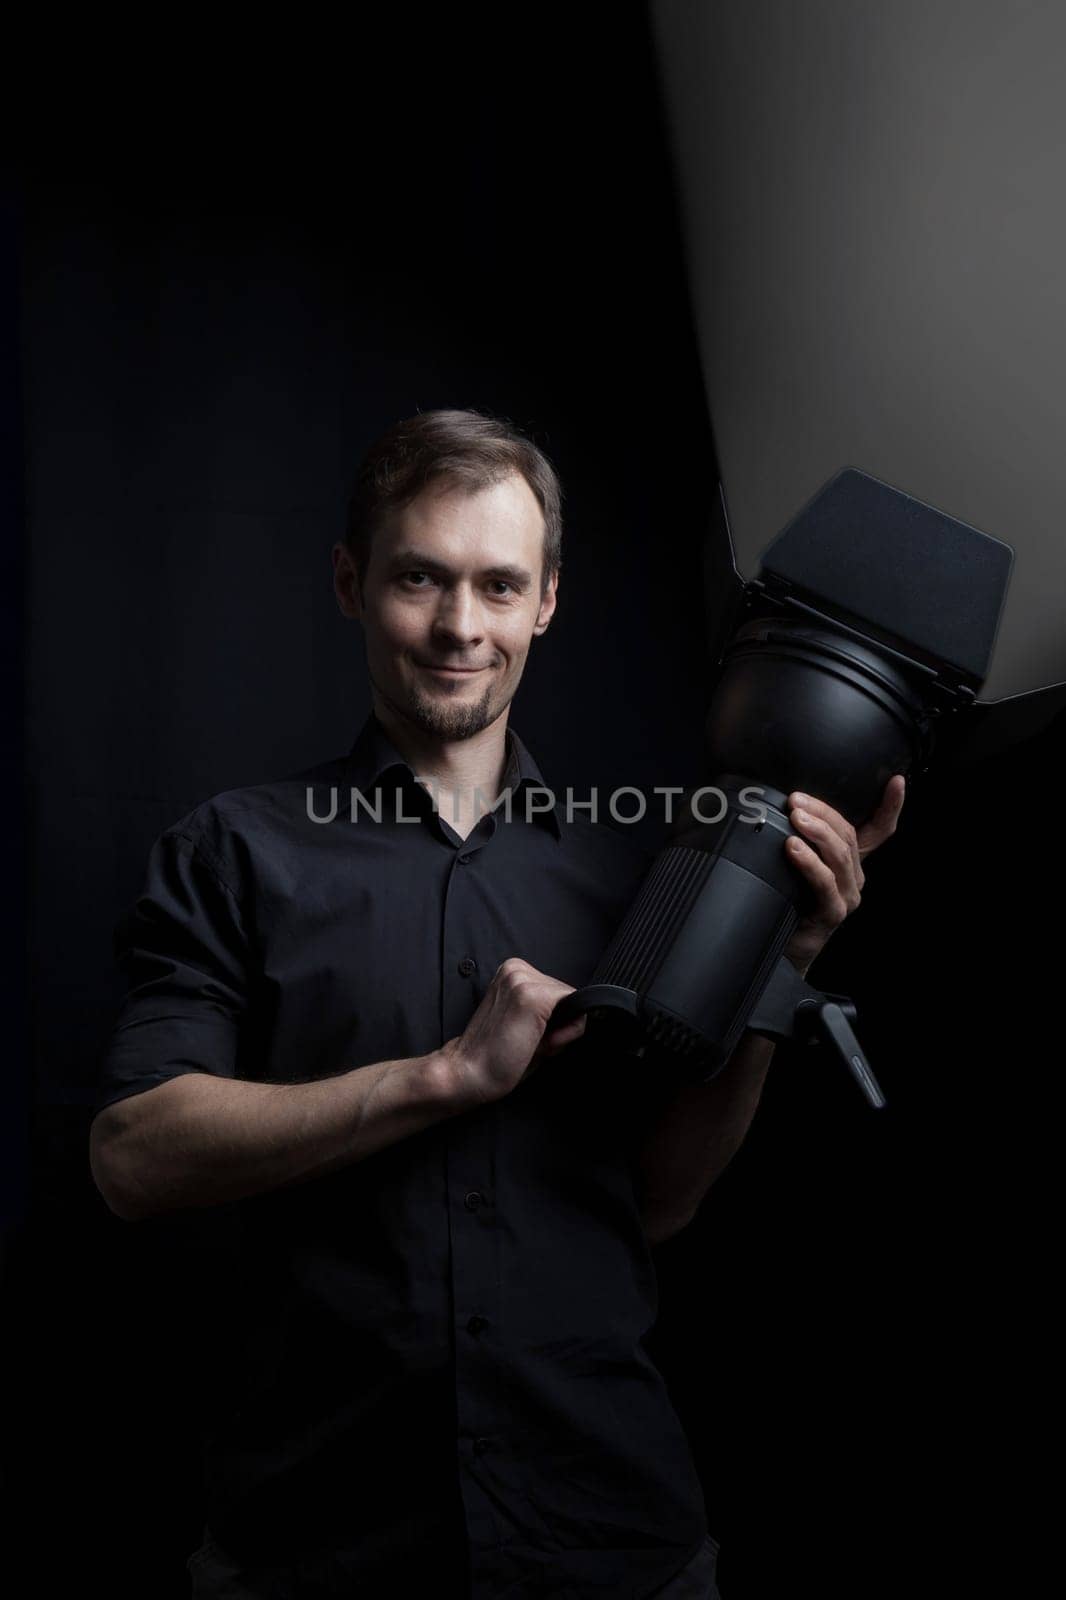 Portrait of a gaffer man with a professional lighting head device in his hands on a black background.